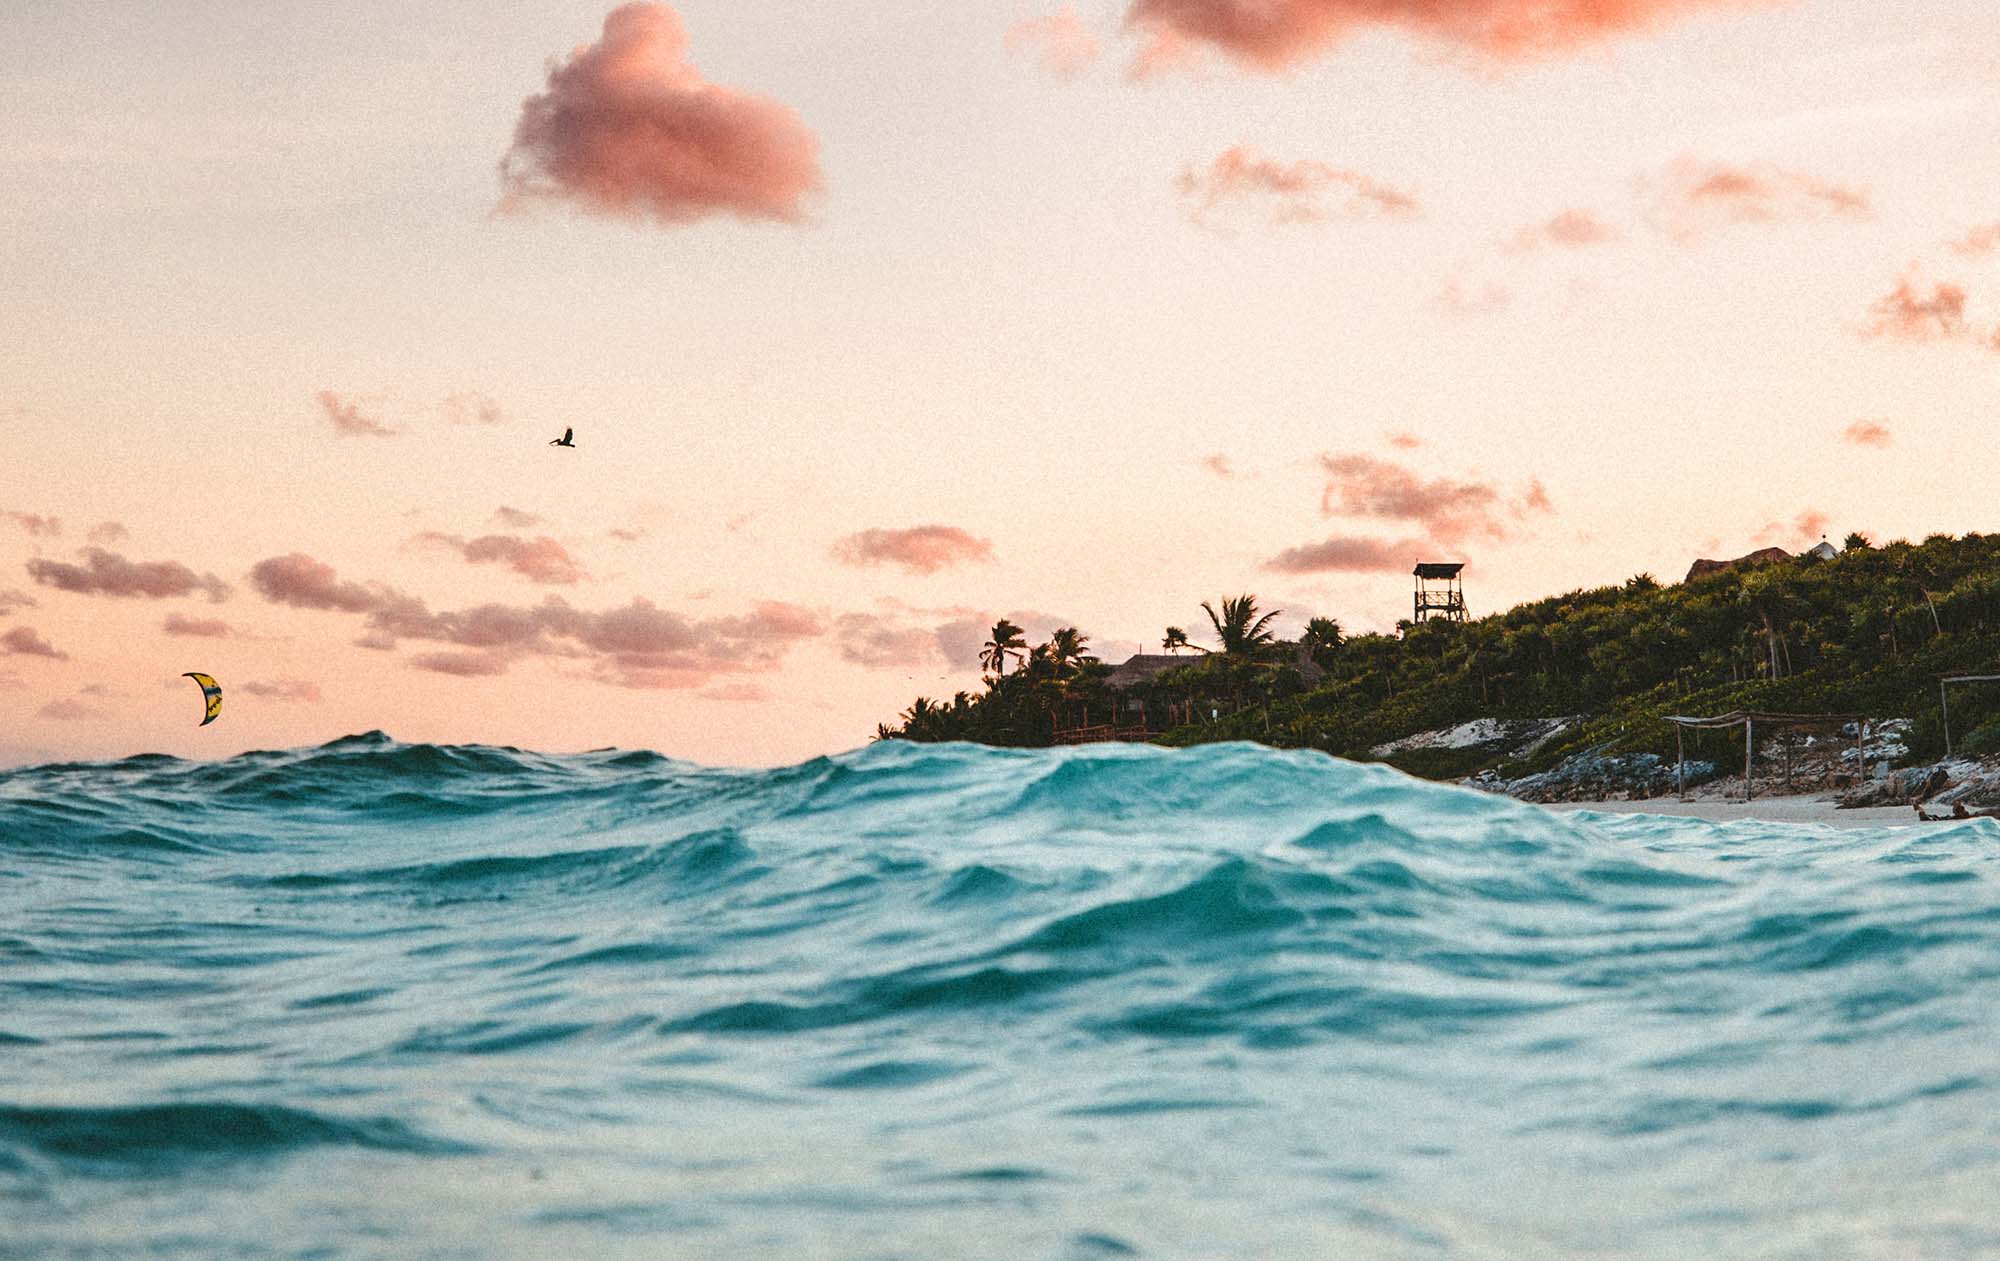 A sunset in the Caribbean. Waves in the foregroudn with the island rising from the sea.